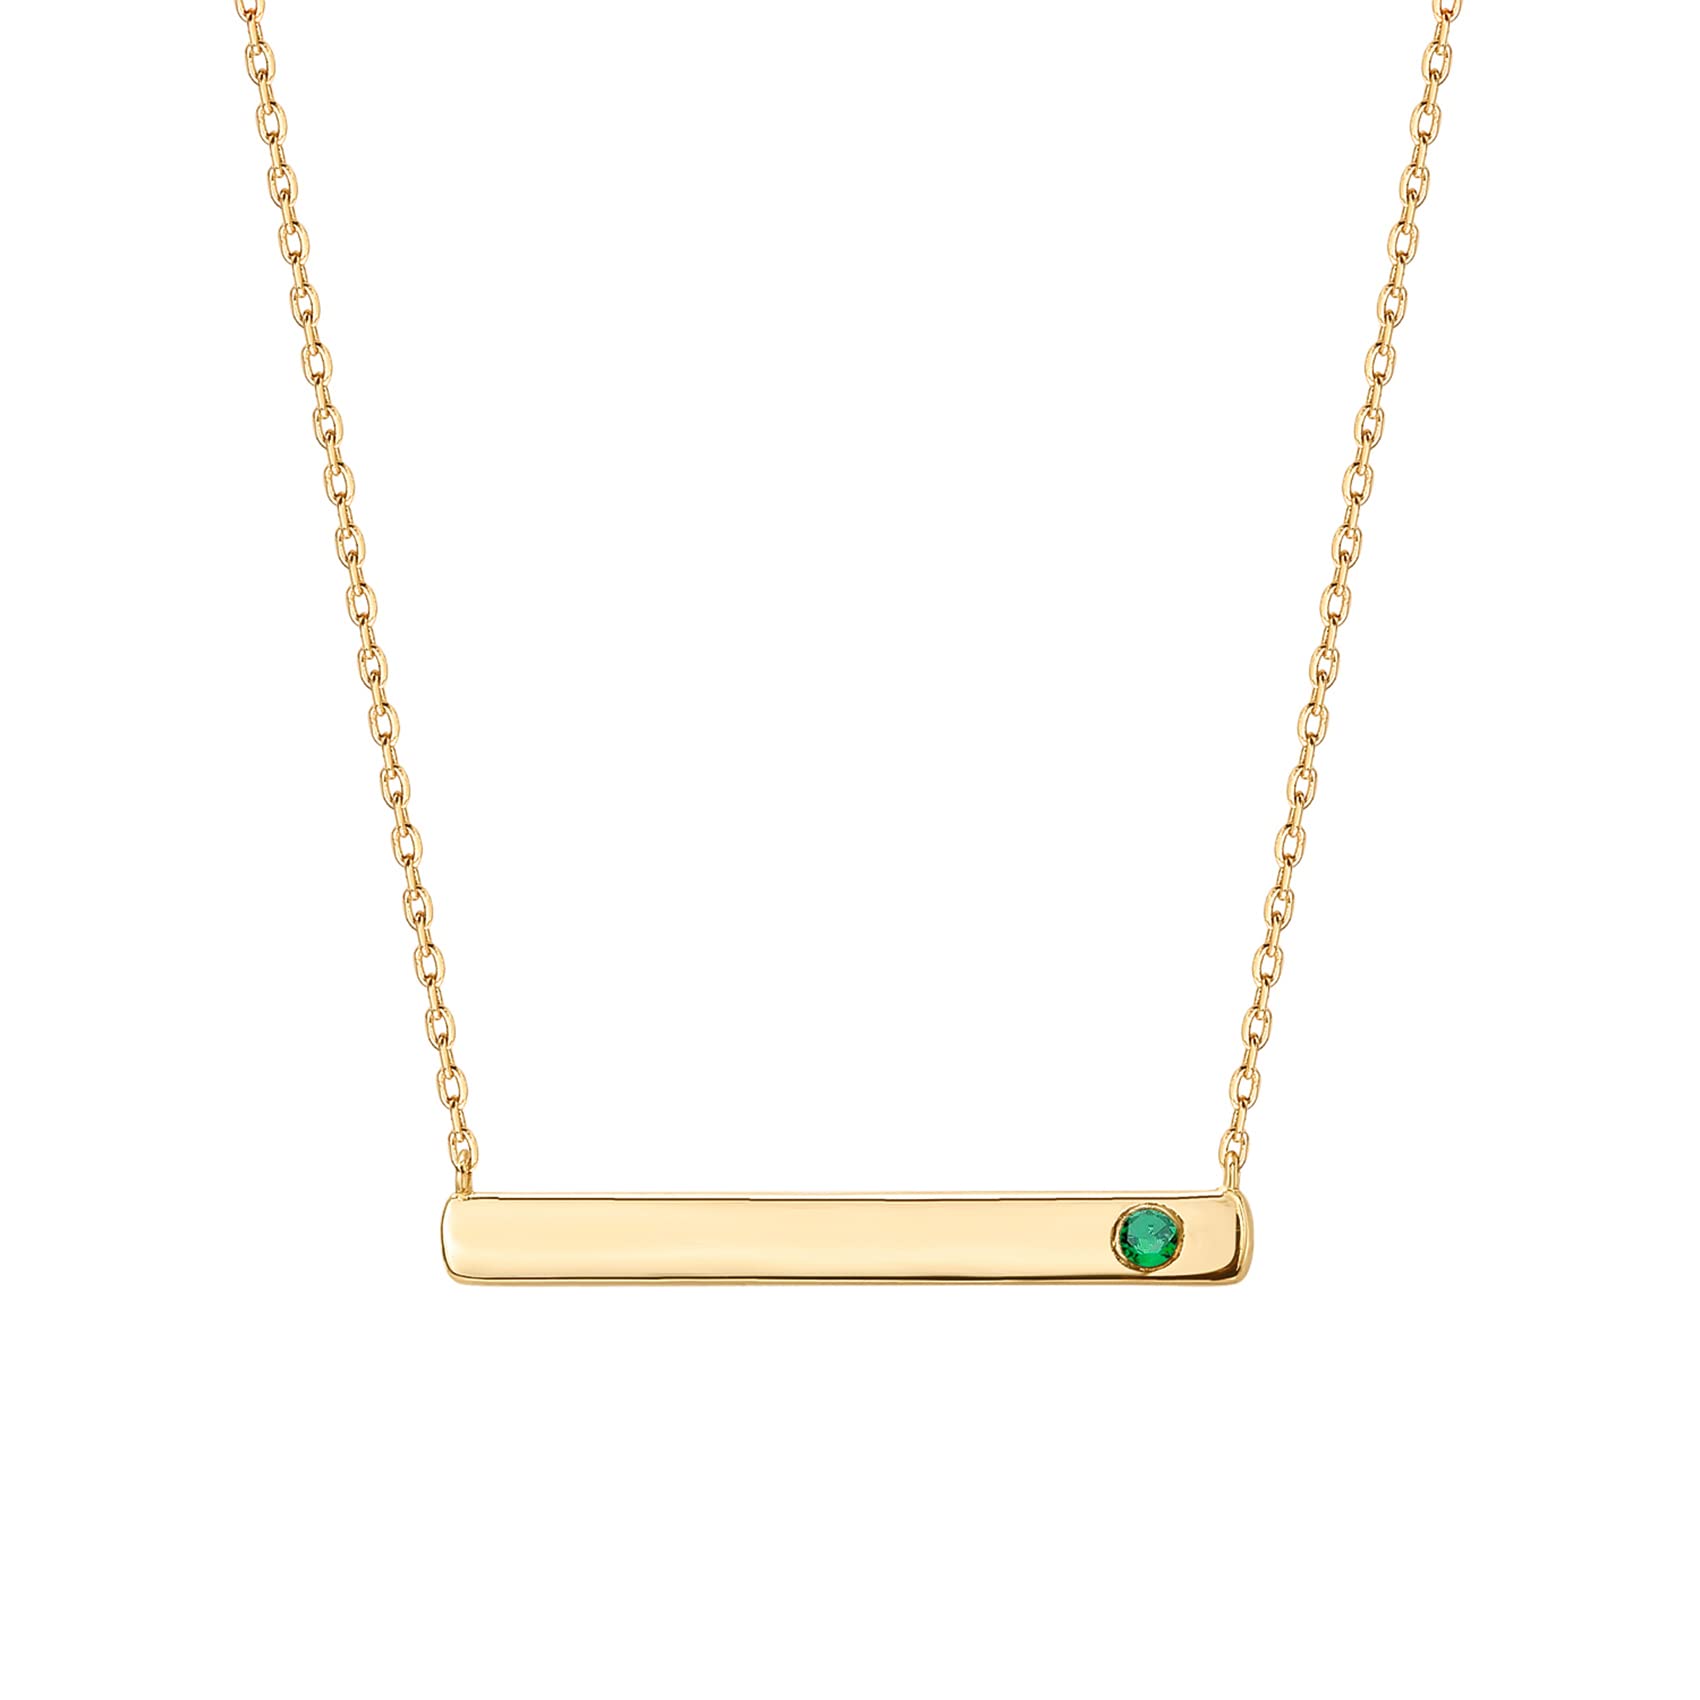 Decent 14K Gold Plated Crystal Birthstone Bar Necklace | Dainty Necklace | Gold Necklaces for Women | May